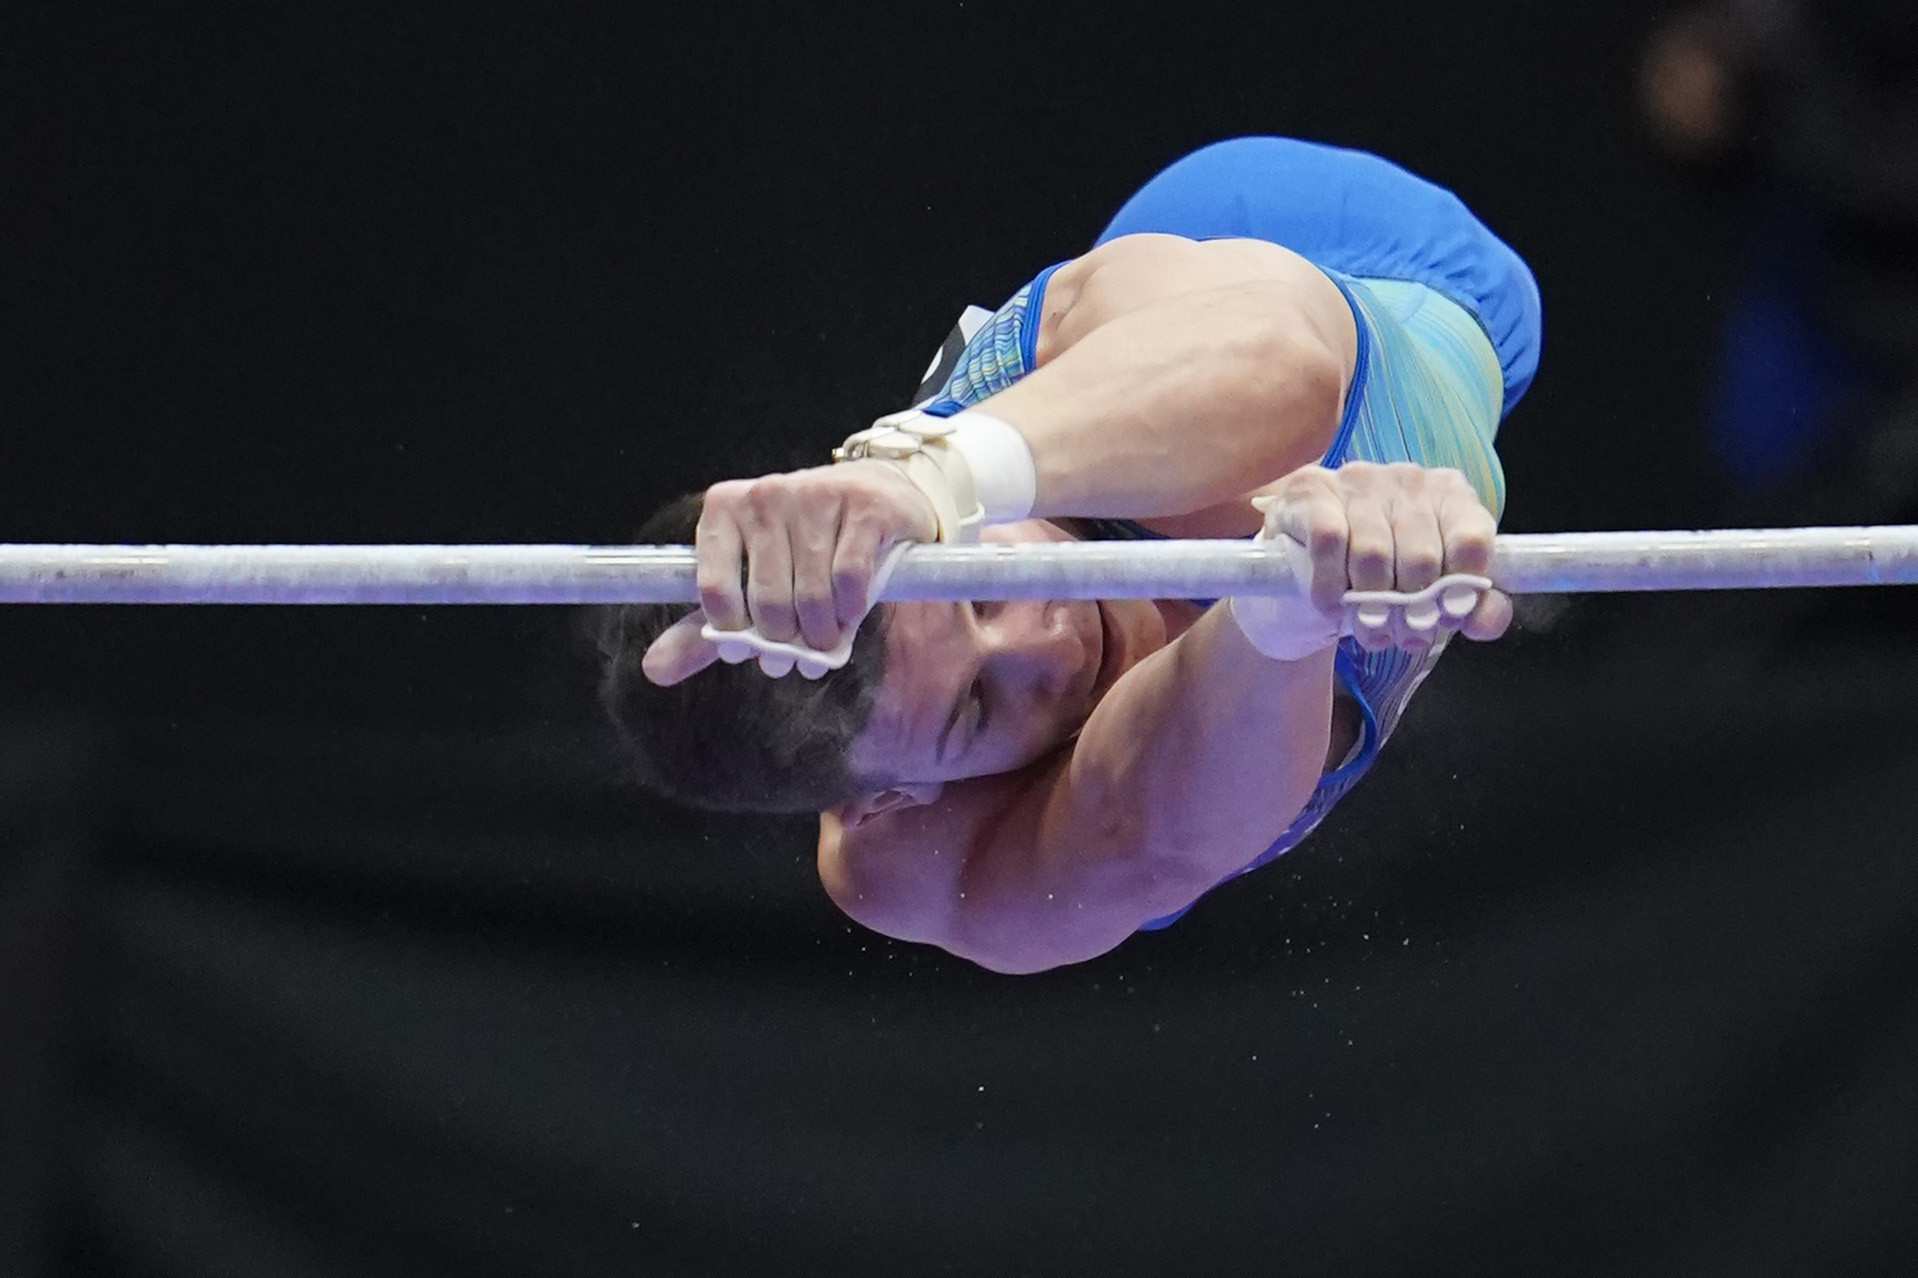 Illia Kovtun achieved another podium at the World Cup after finishing third in the horizontal bar ©Getty Images